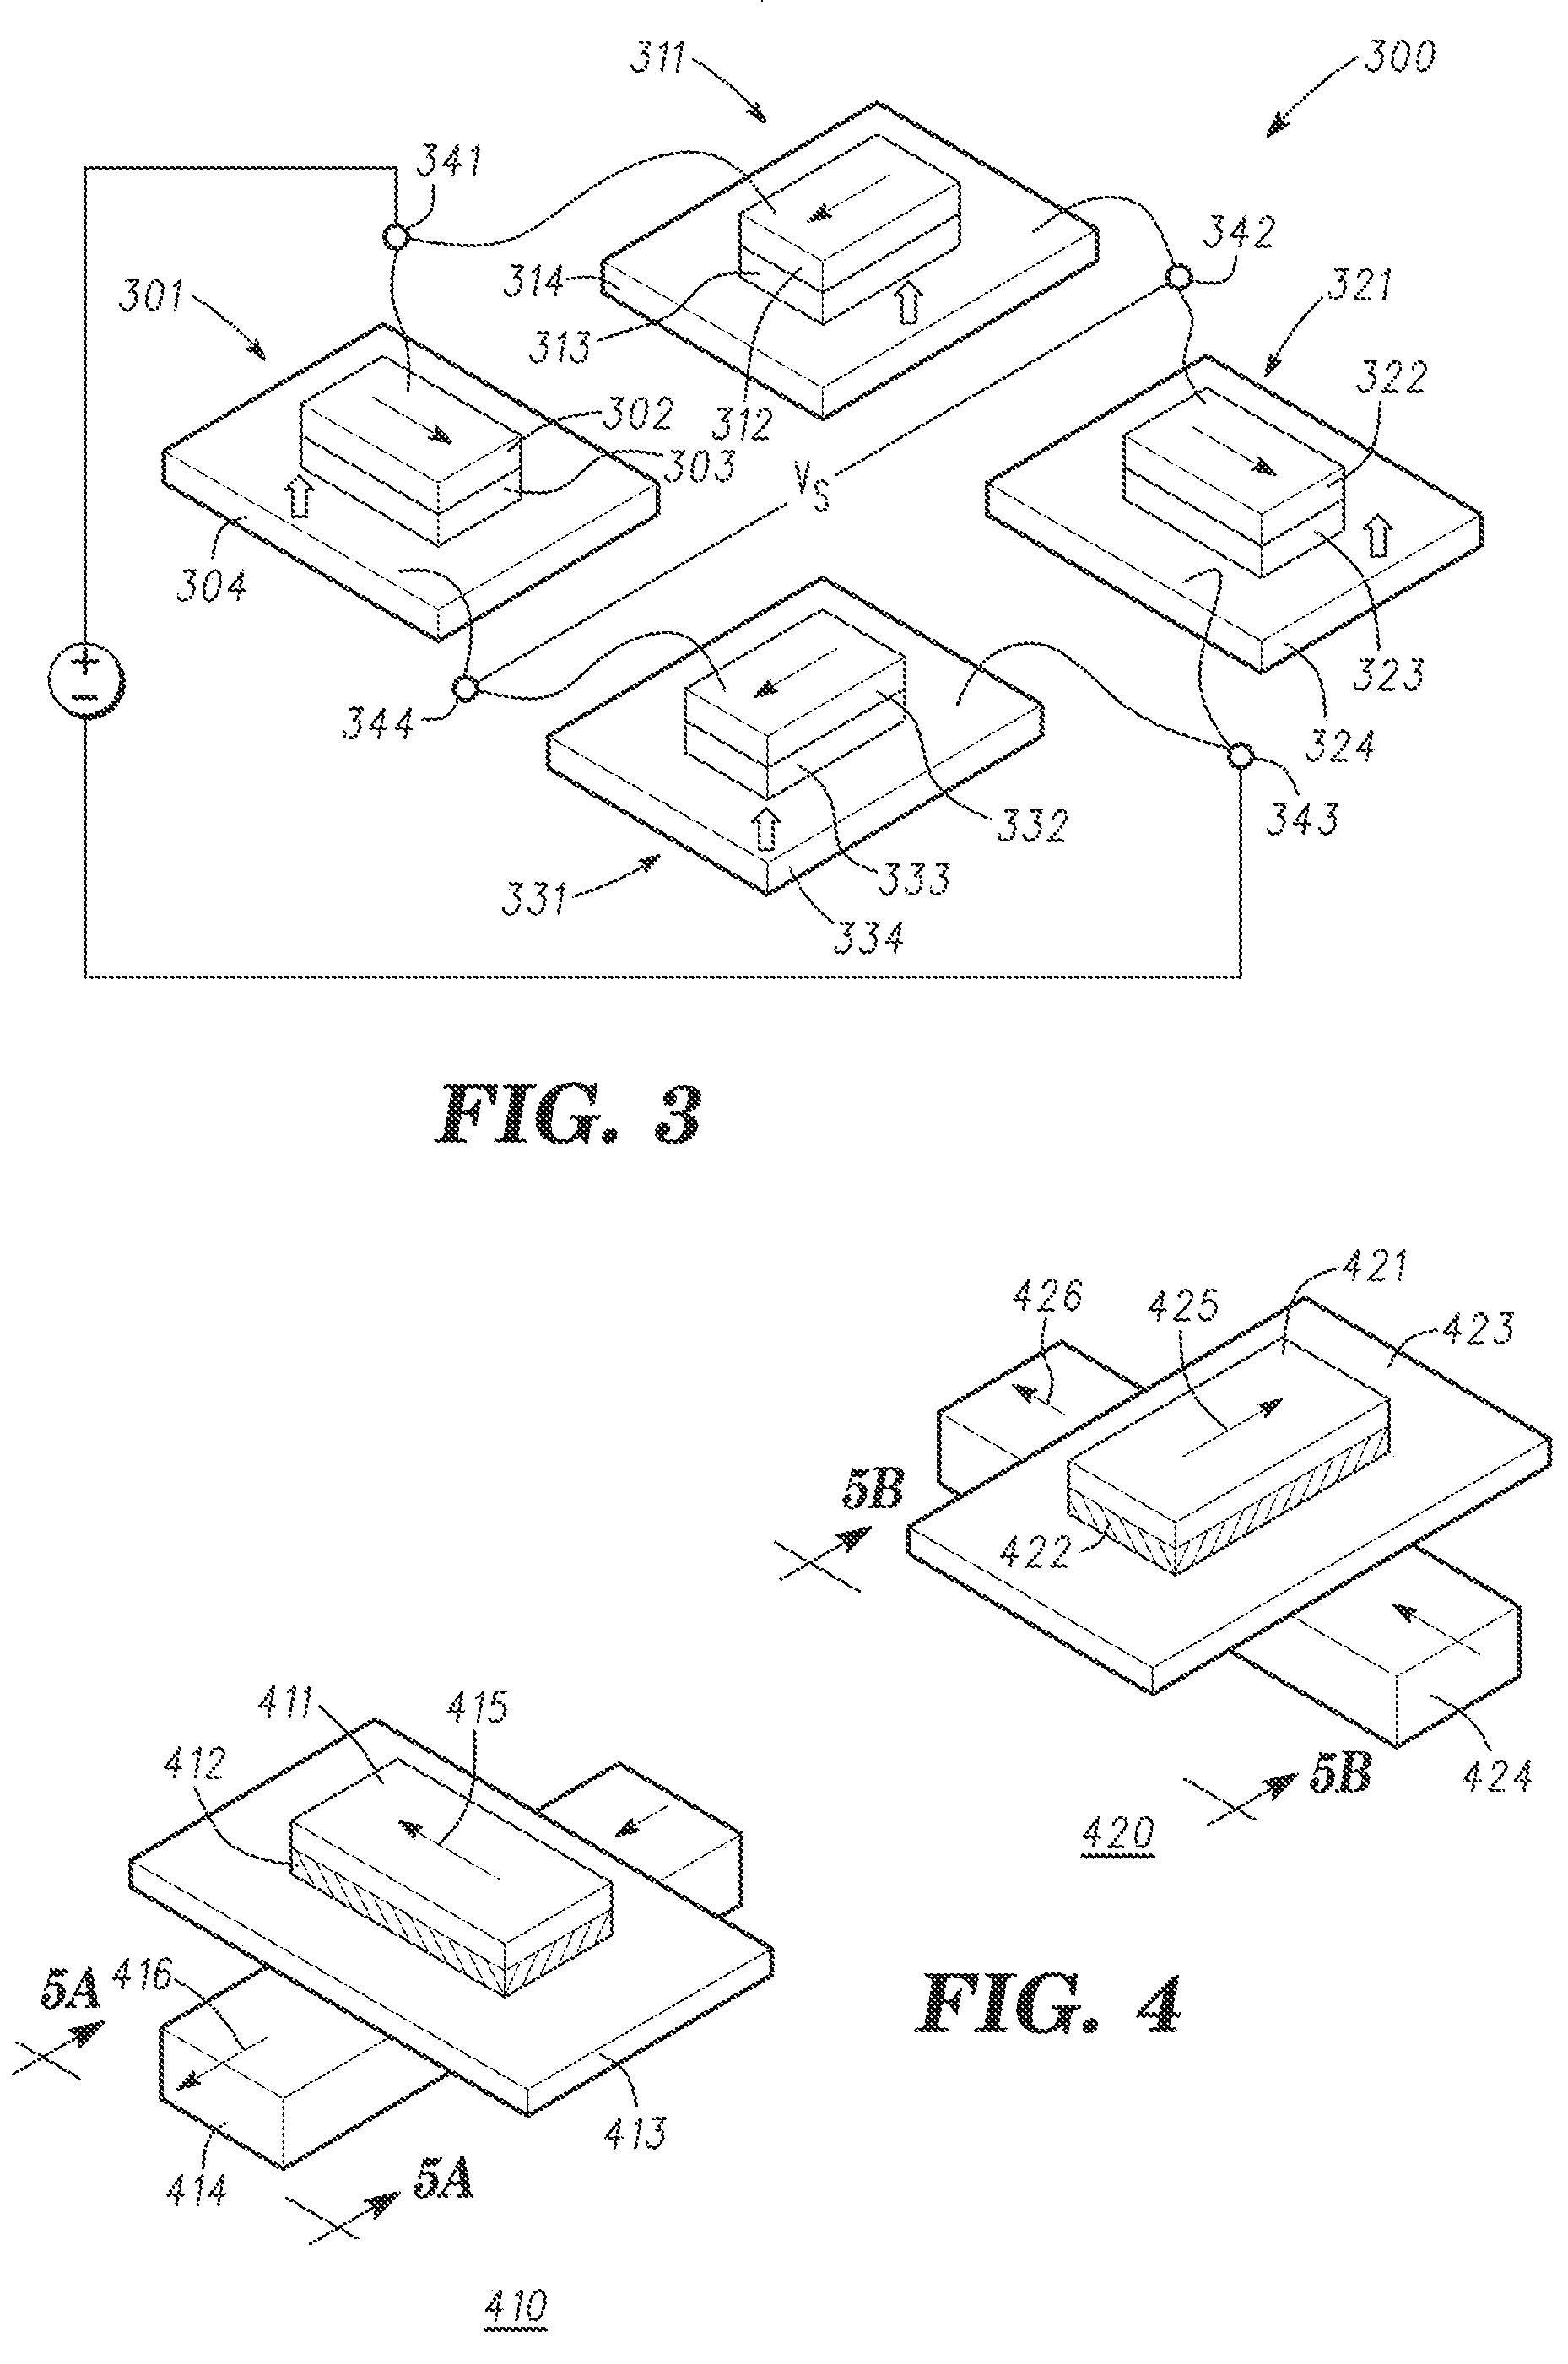 Fabrication process and layout for magnetic sensor arrays